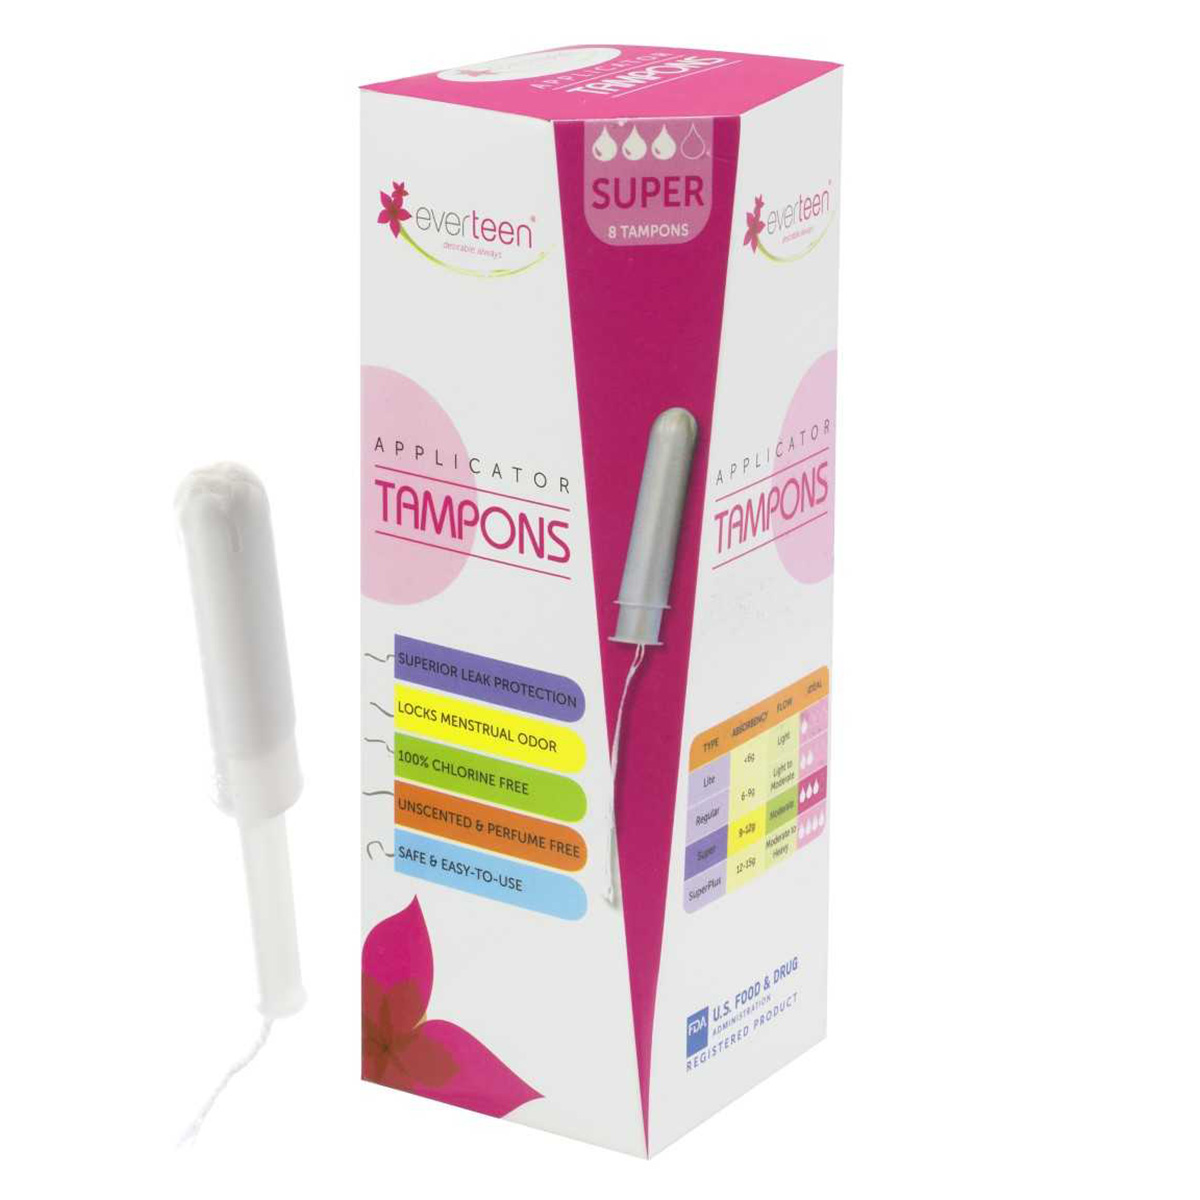 everteen Super Applicator Tampons For Periods In Women, 8 Tampons